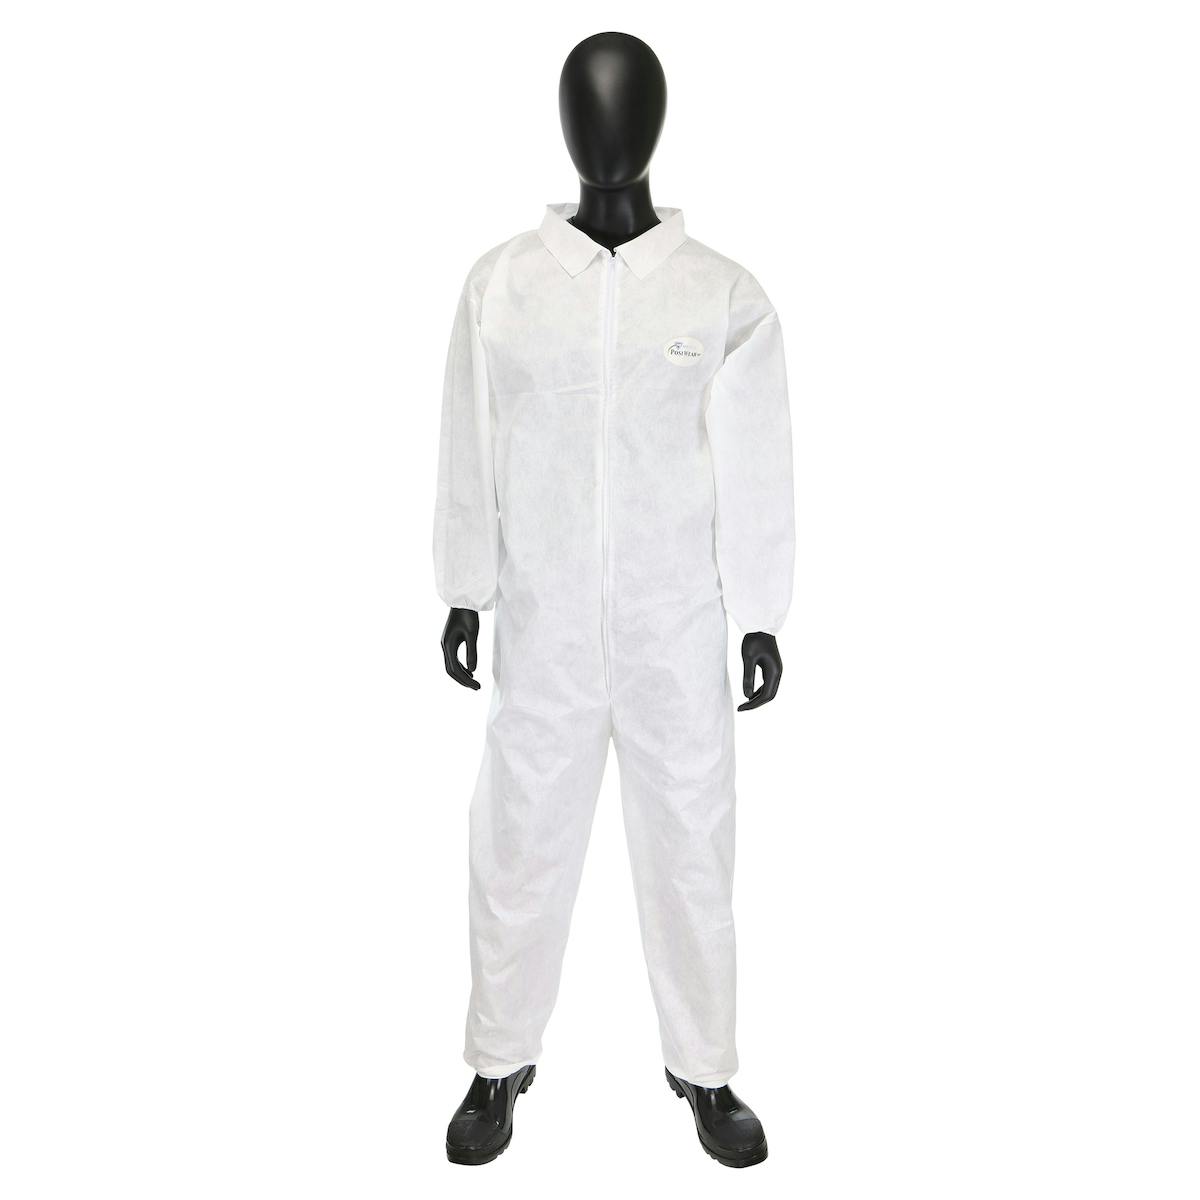 PosiWear M3 - Coverall with Elastic Wrist & Ankle 50 gsm, White (C3802)